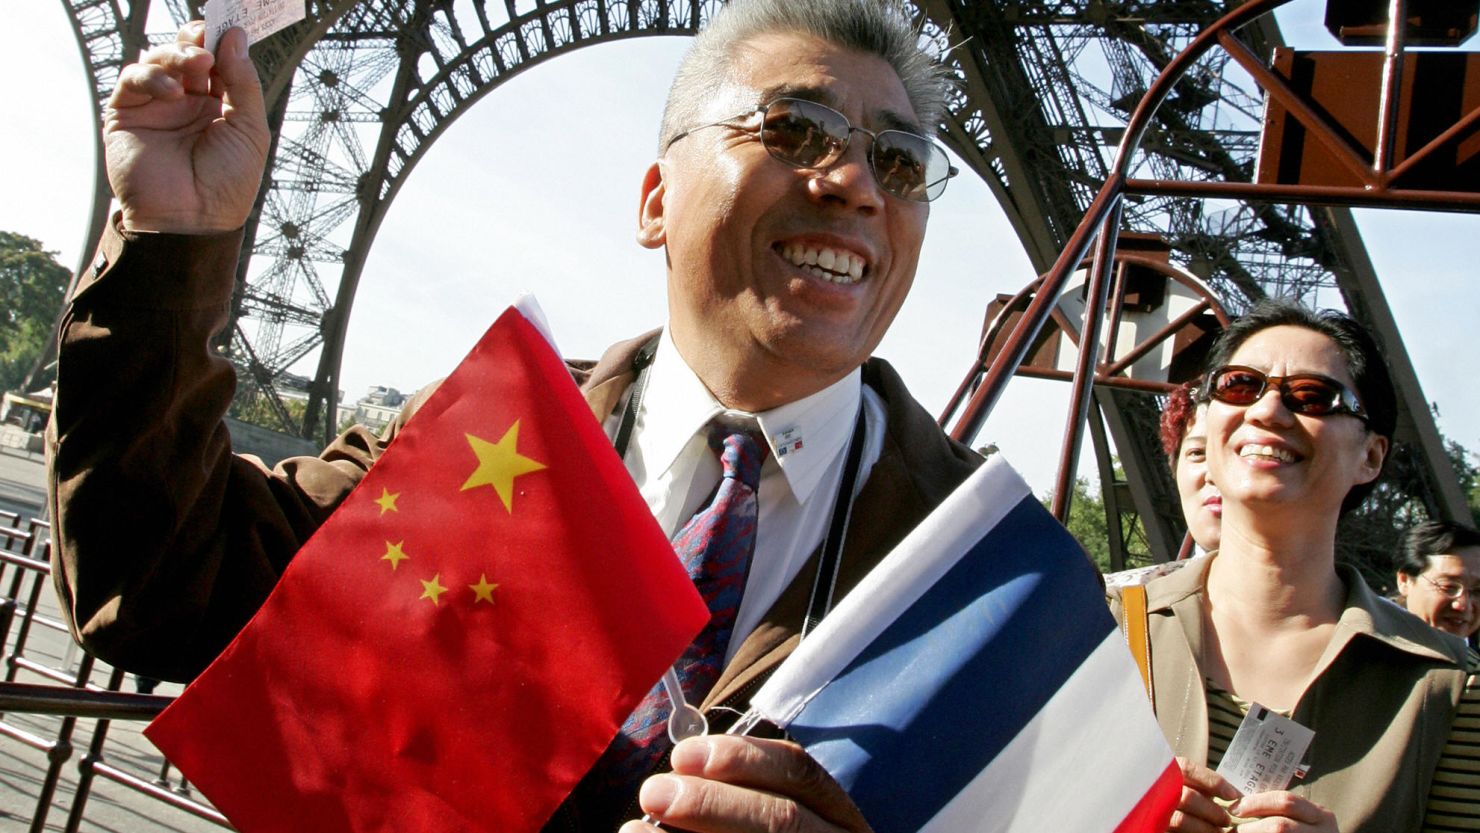 Paris, the capital of France, has become a popular destination for Chinese travelers over the years.